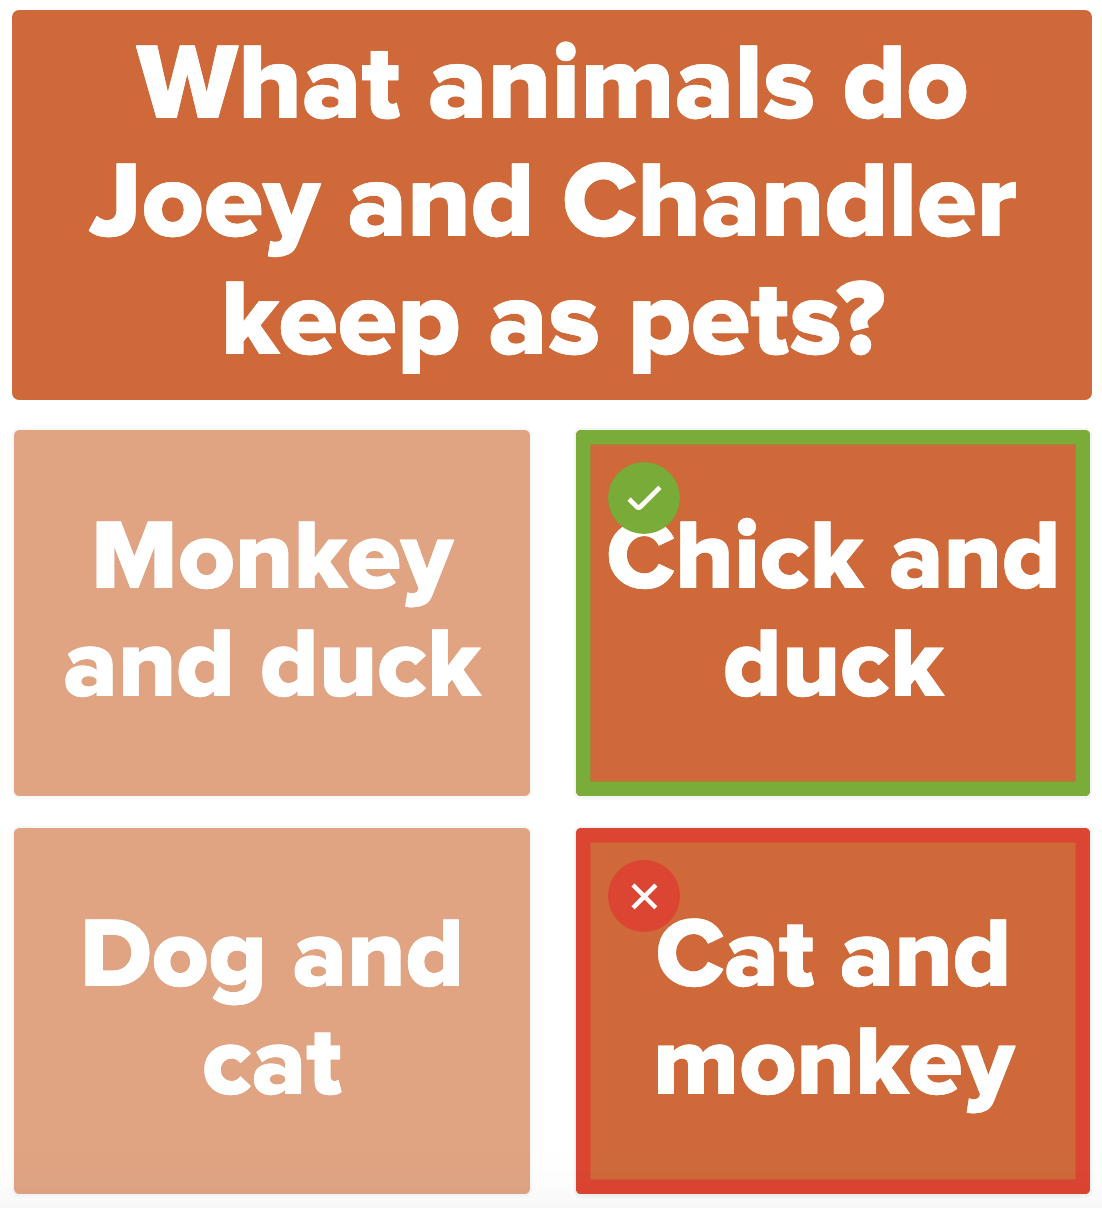 A quiz question asking what pets Joey and Chandler have